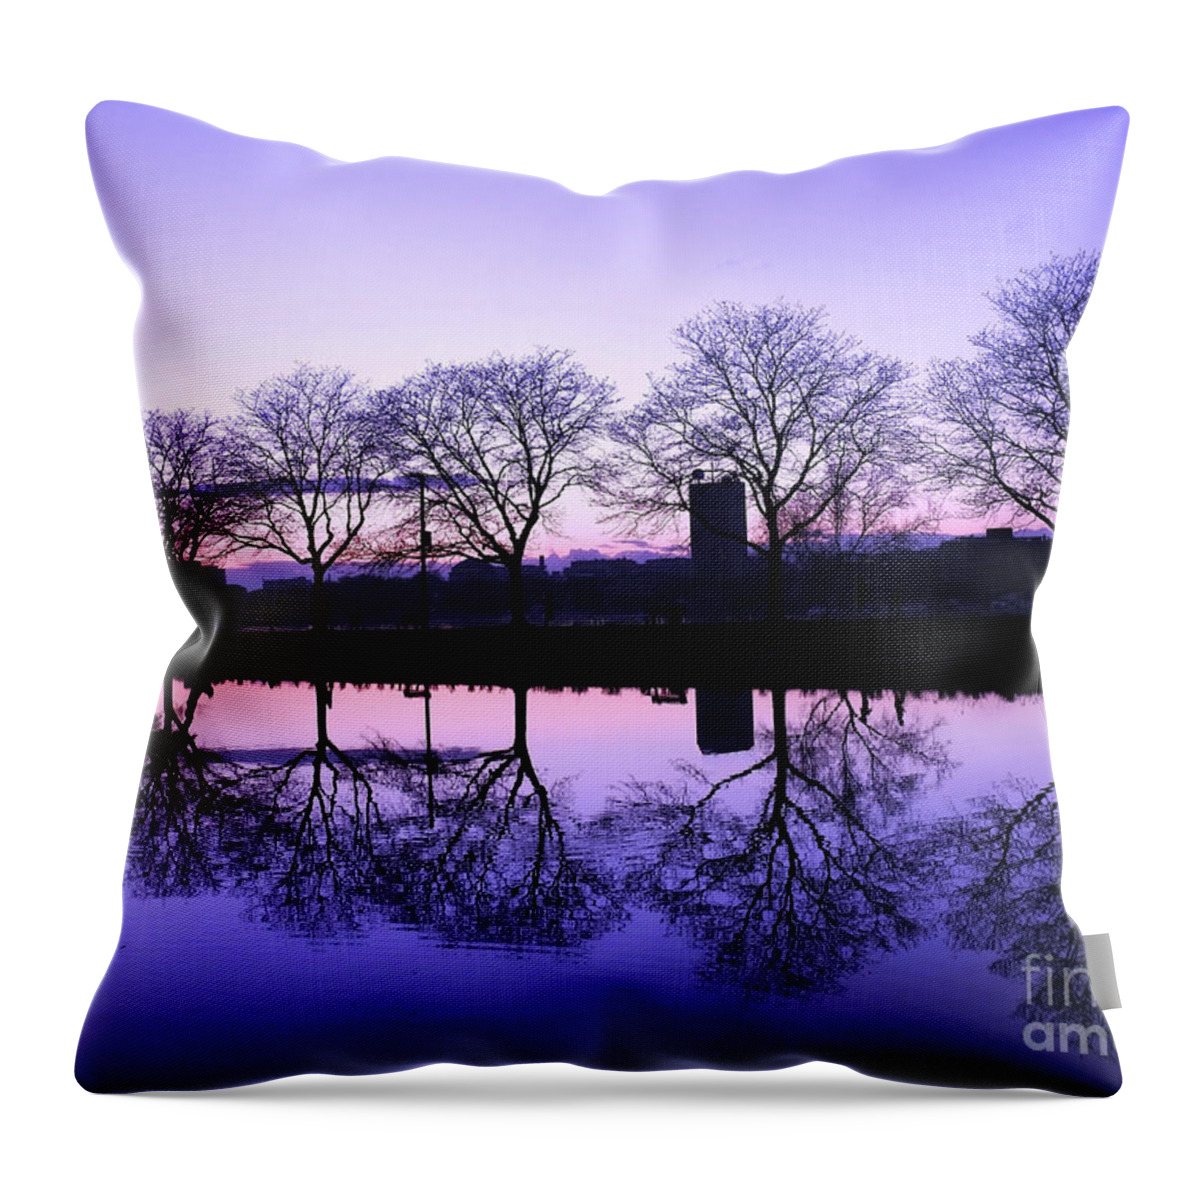 Landscape Throw Pillow featuring the photograph Bare Tree Reflection by Beth Myer Photography